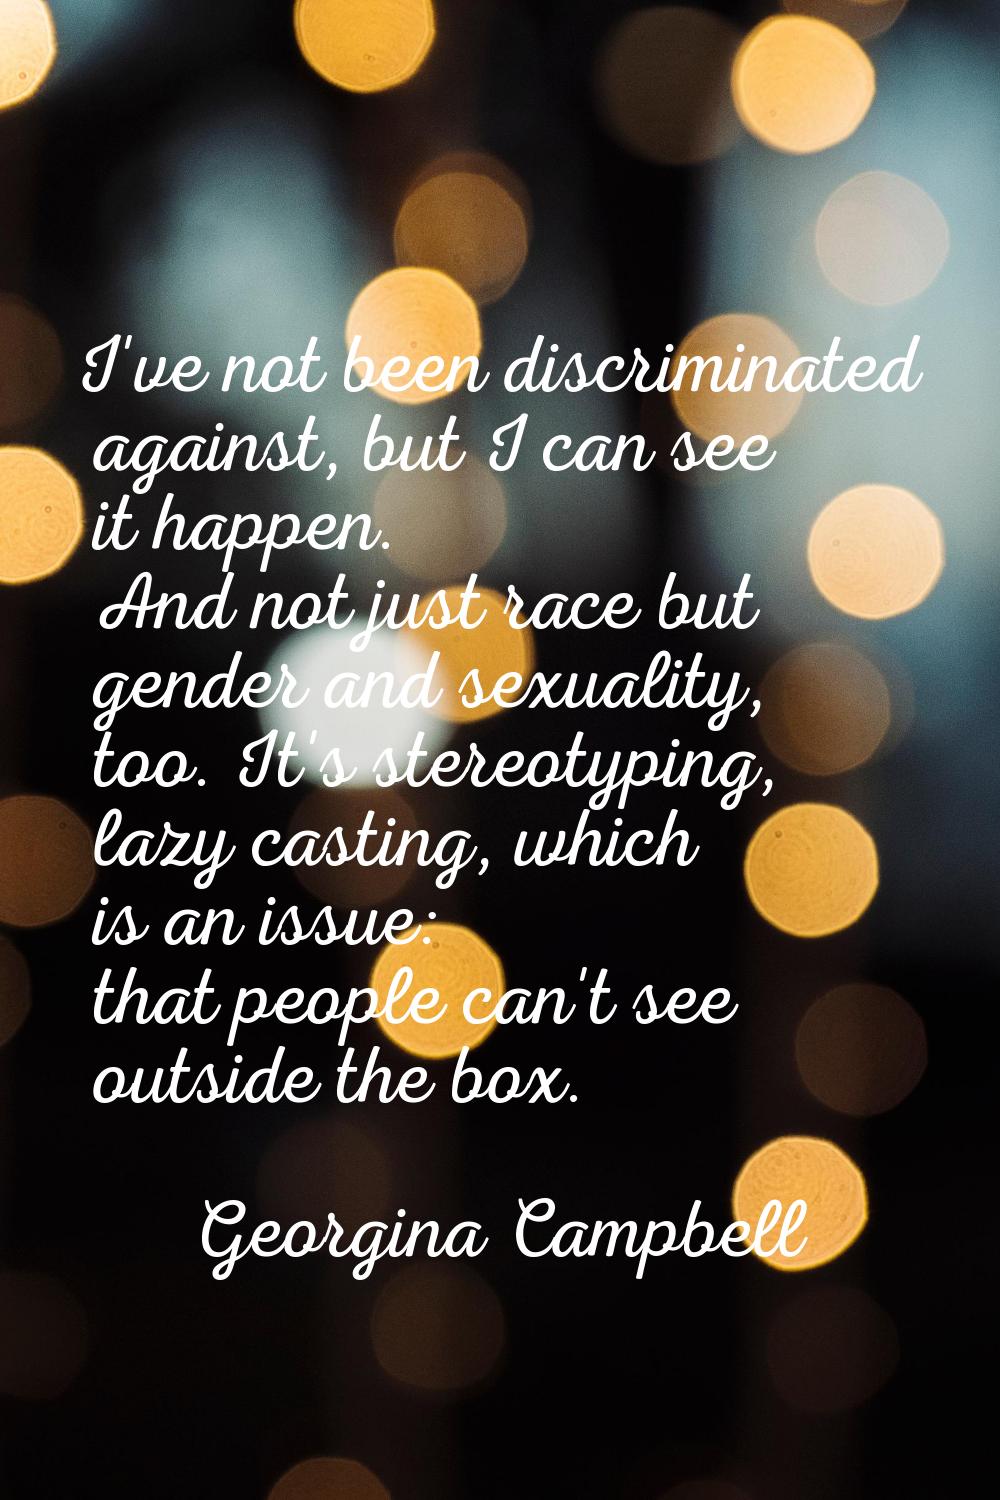 I've not been discriminated against, but I can see it happen. And not just race but gender and sexu